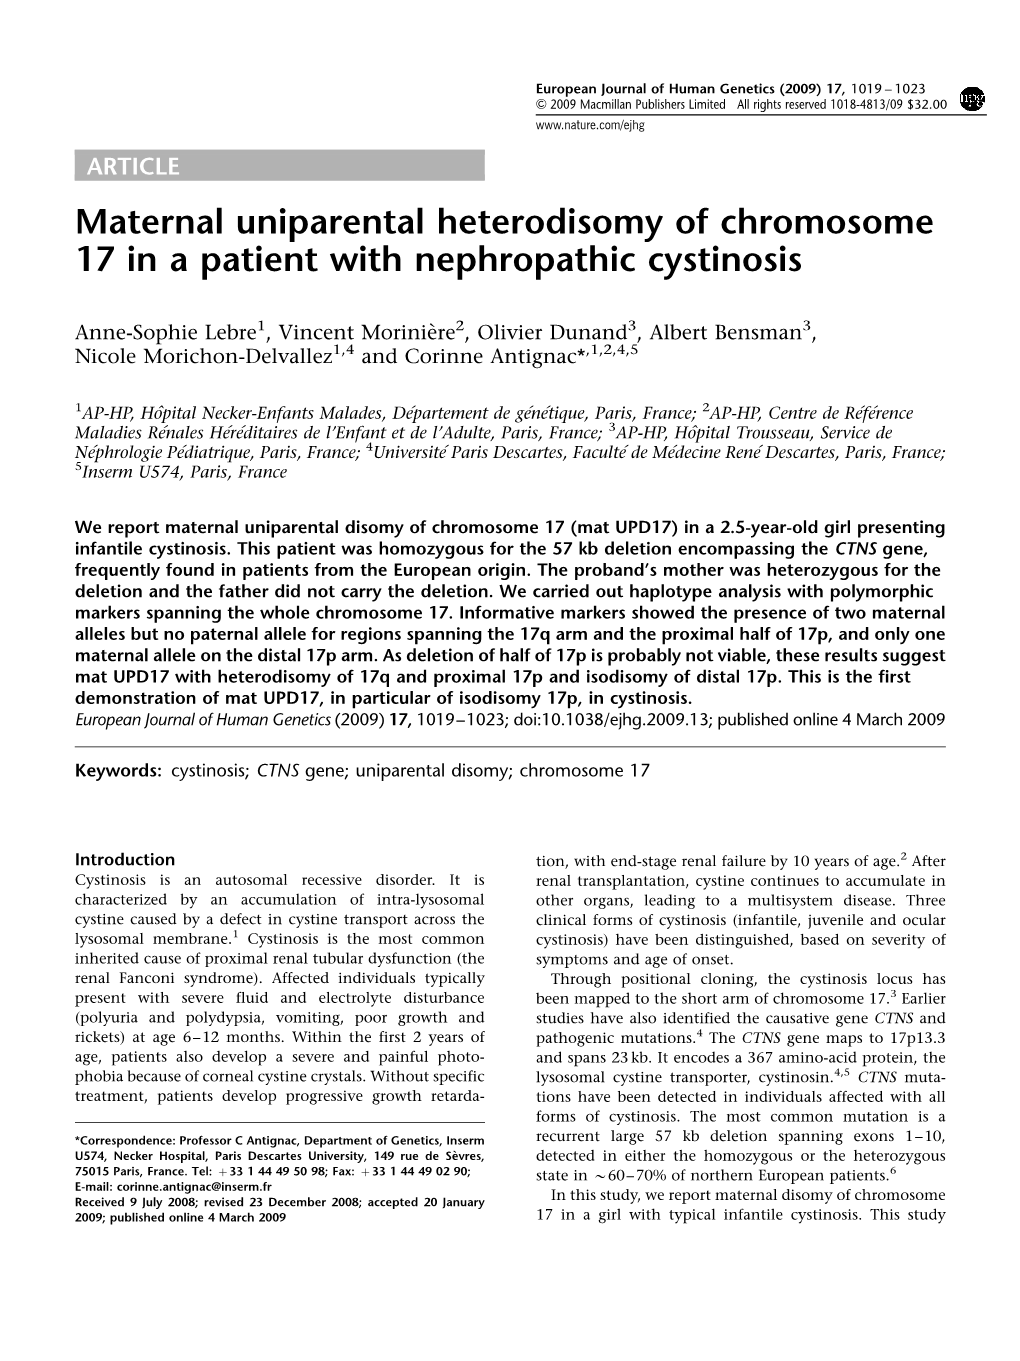 Maternal Uniparental Heterodisomy of Chromosome 17 in a Patient with Nephropathic Cystinosis